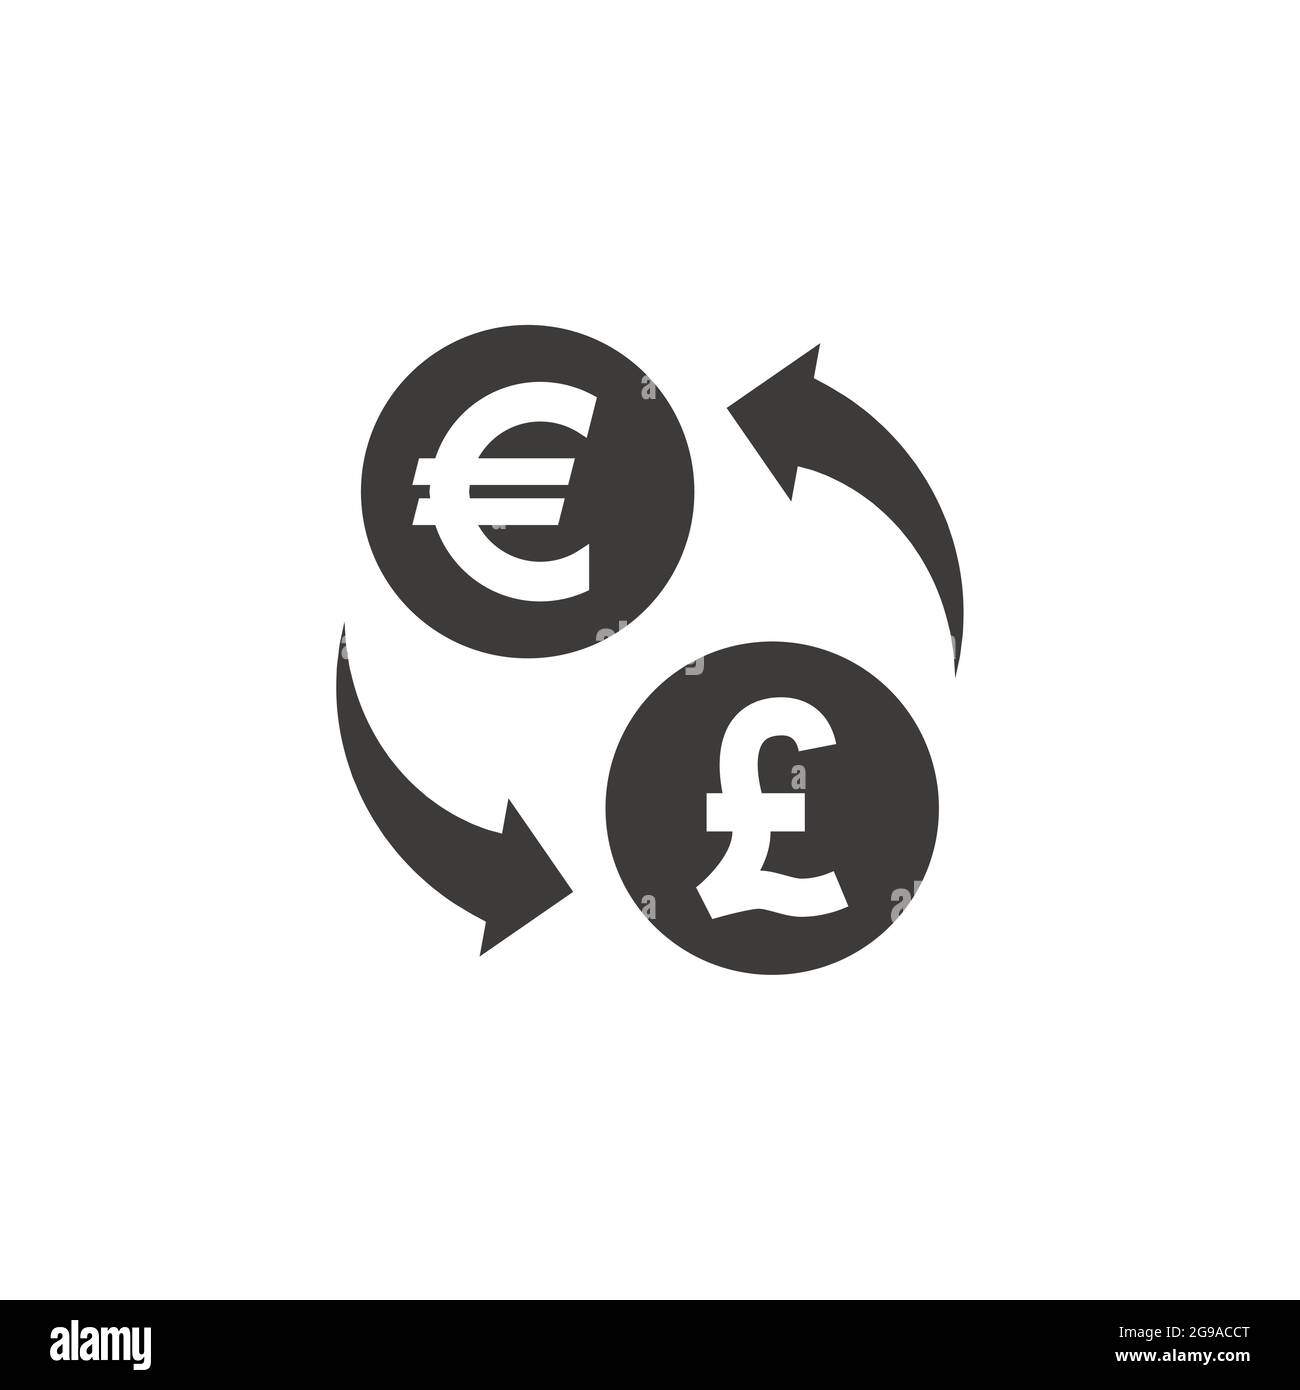 Pound and euro exchange black vector icon. Loop with arrows, currency symbol. Stock Vector